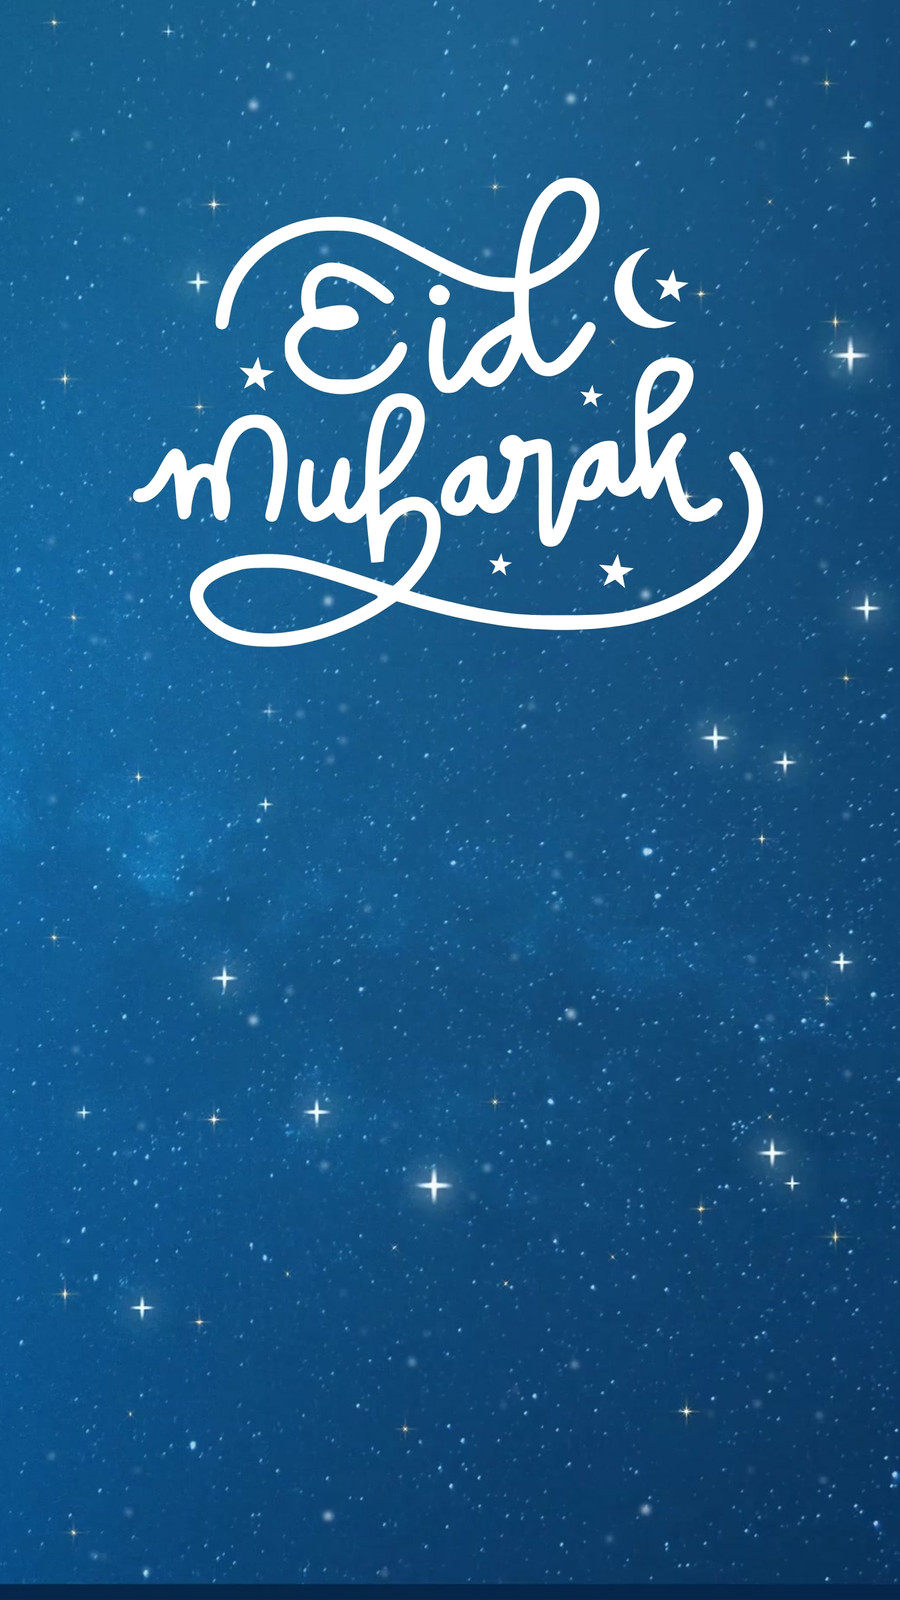 Eid Mubarak Wishes SMS and Message with Greetings Pictures | Poetry | Eid  mubarak wishes, Eid mubarak, Eid mubarak hd images